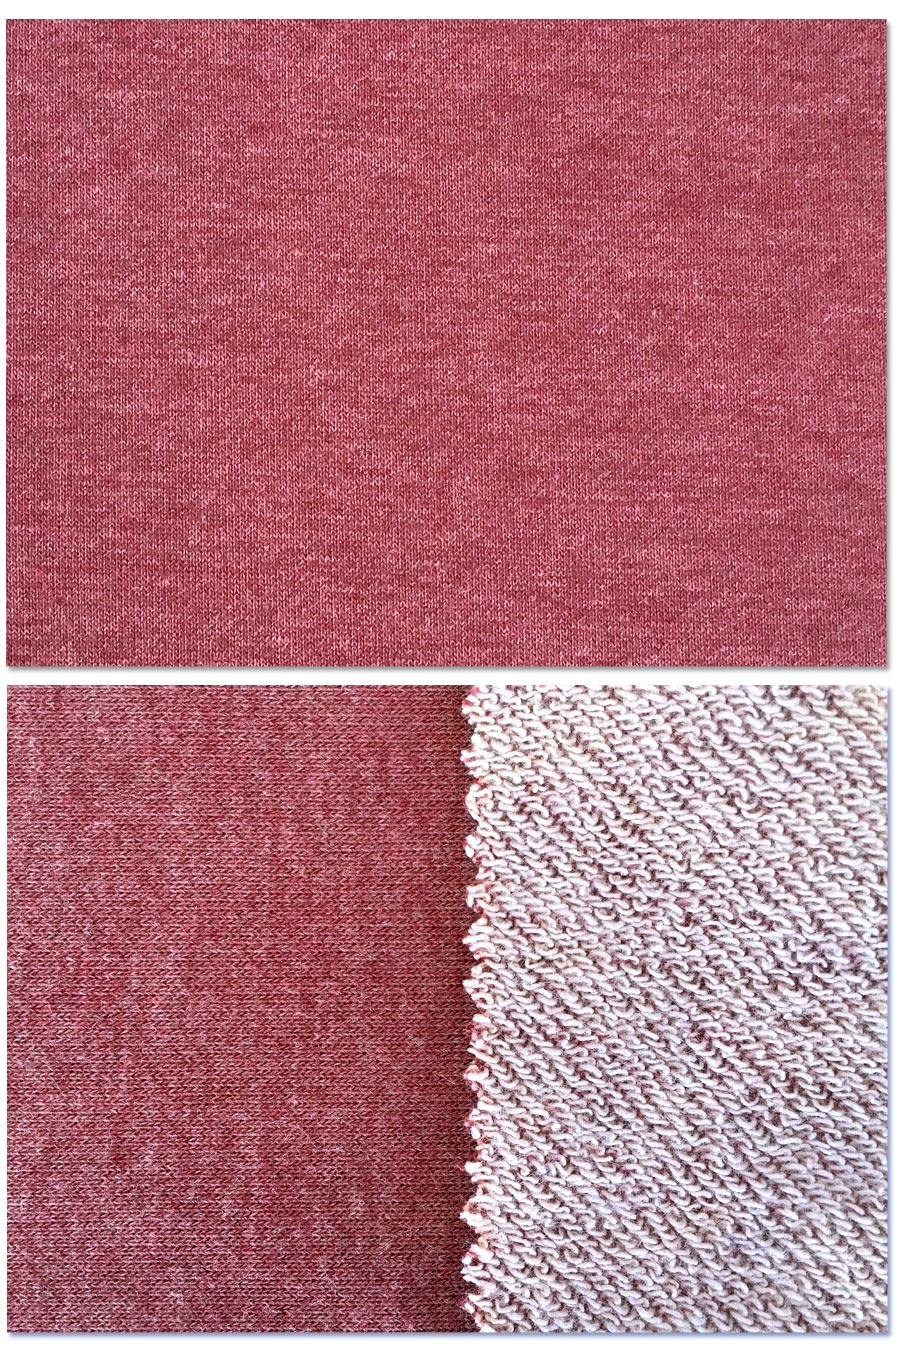 1.8M 260G Knitted TC French Terry Fabric